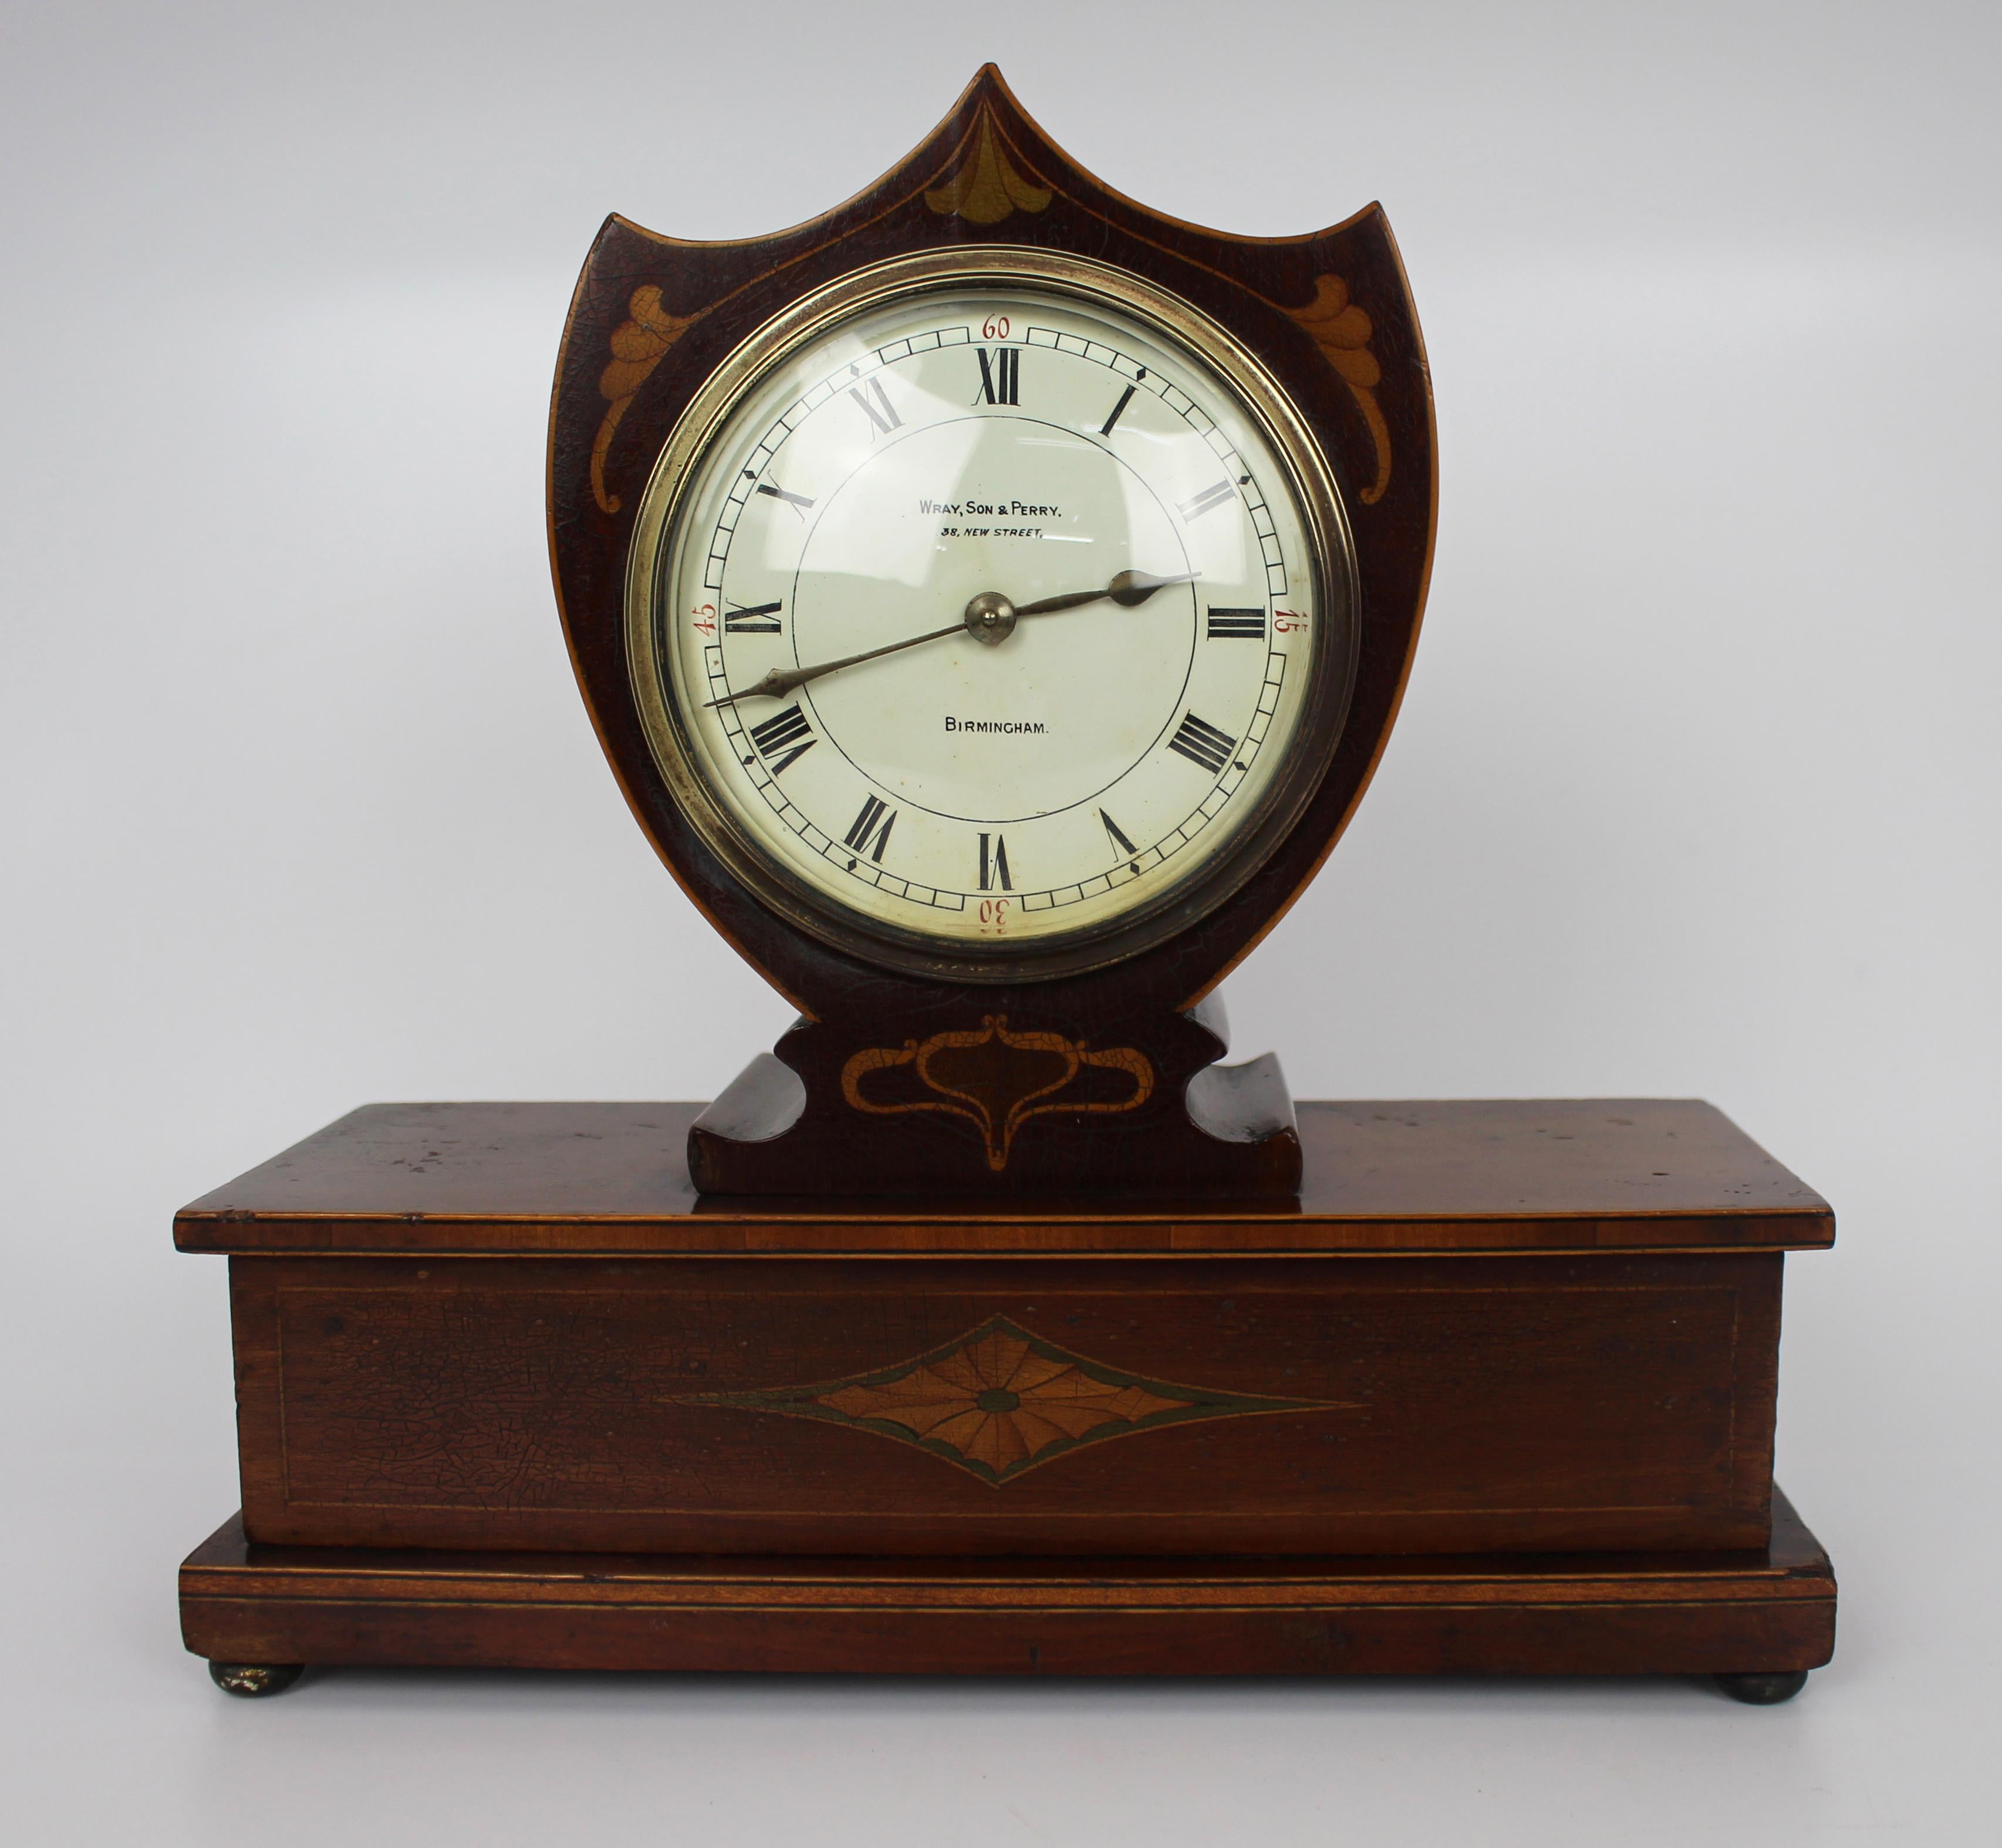 Elegant inlaid mahogany mantle clock by Wray, Son & Perry c.1900


Fine small antique Victorian mantle clock 

Wray, Son & Perry 38 New Street, Birmingham. 

Mahogany clock with satinwood & ebony inlay. 

The upper clock of shield form,